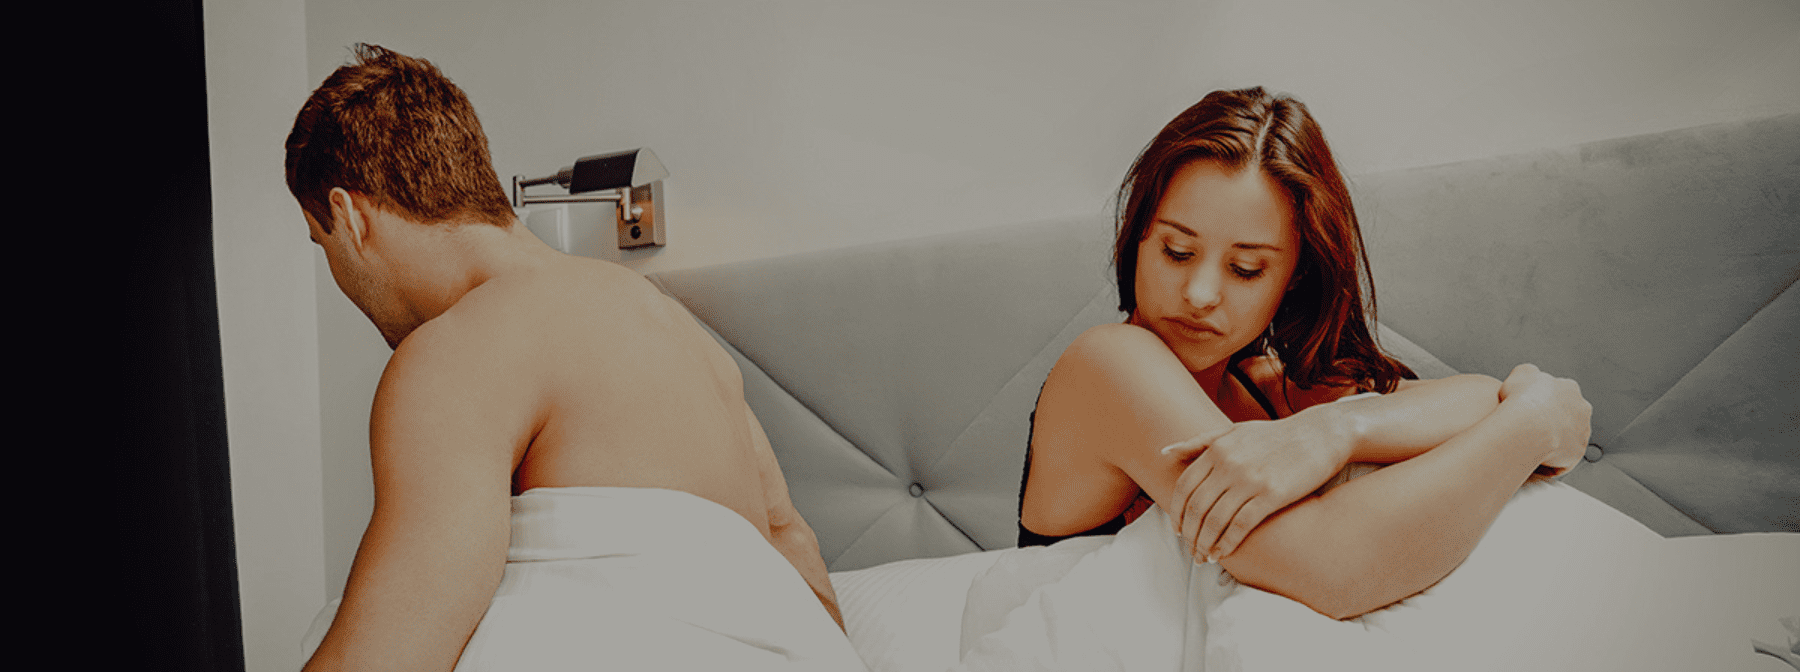 How Long Do Women Really Want You To Last In Bed?